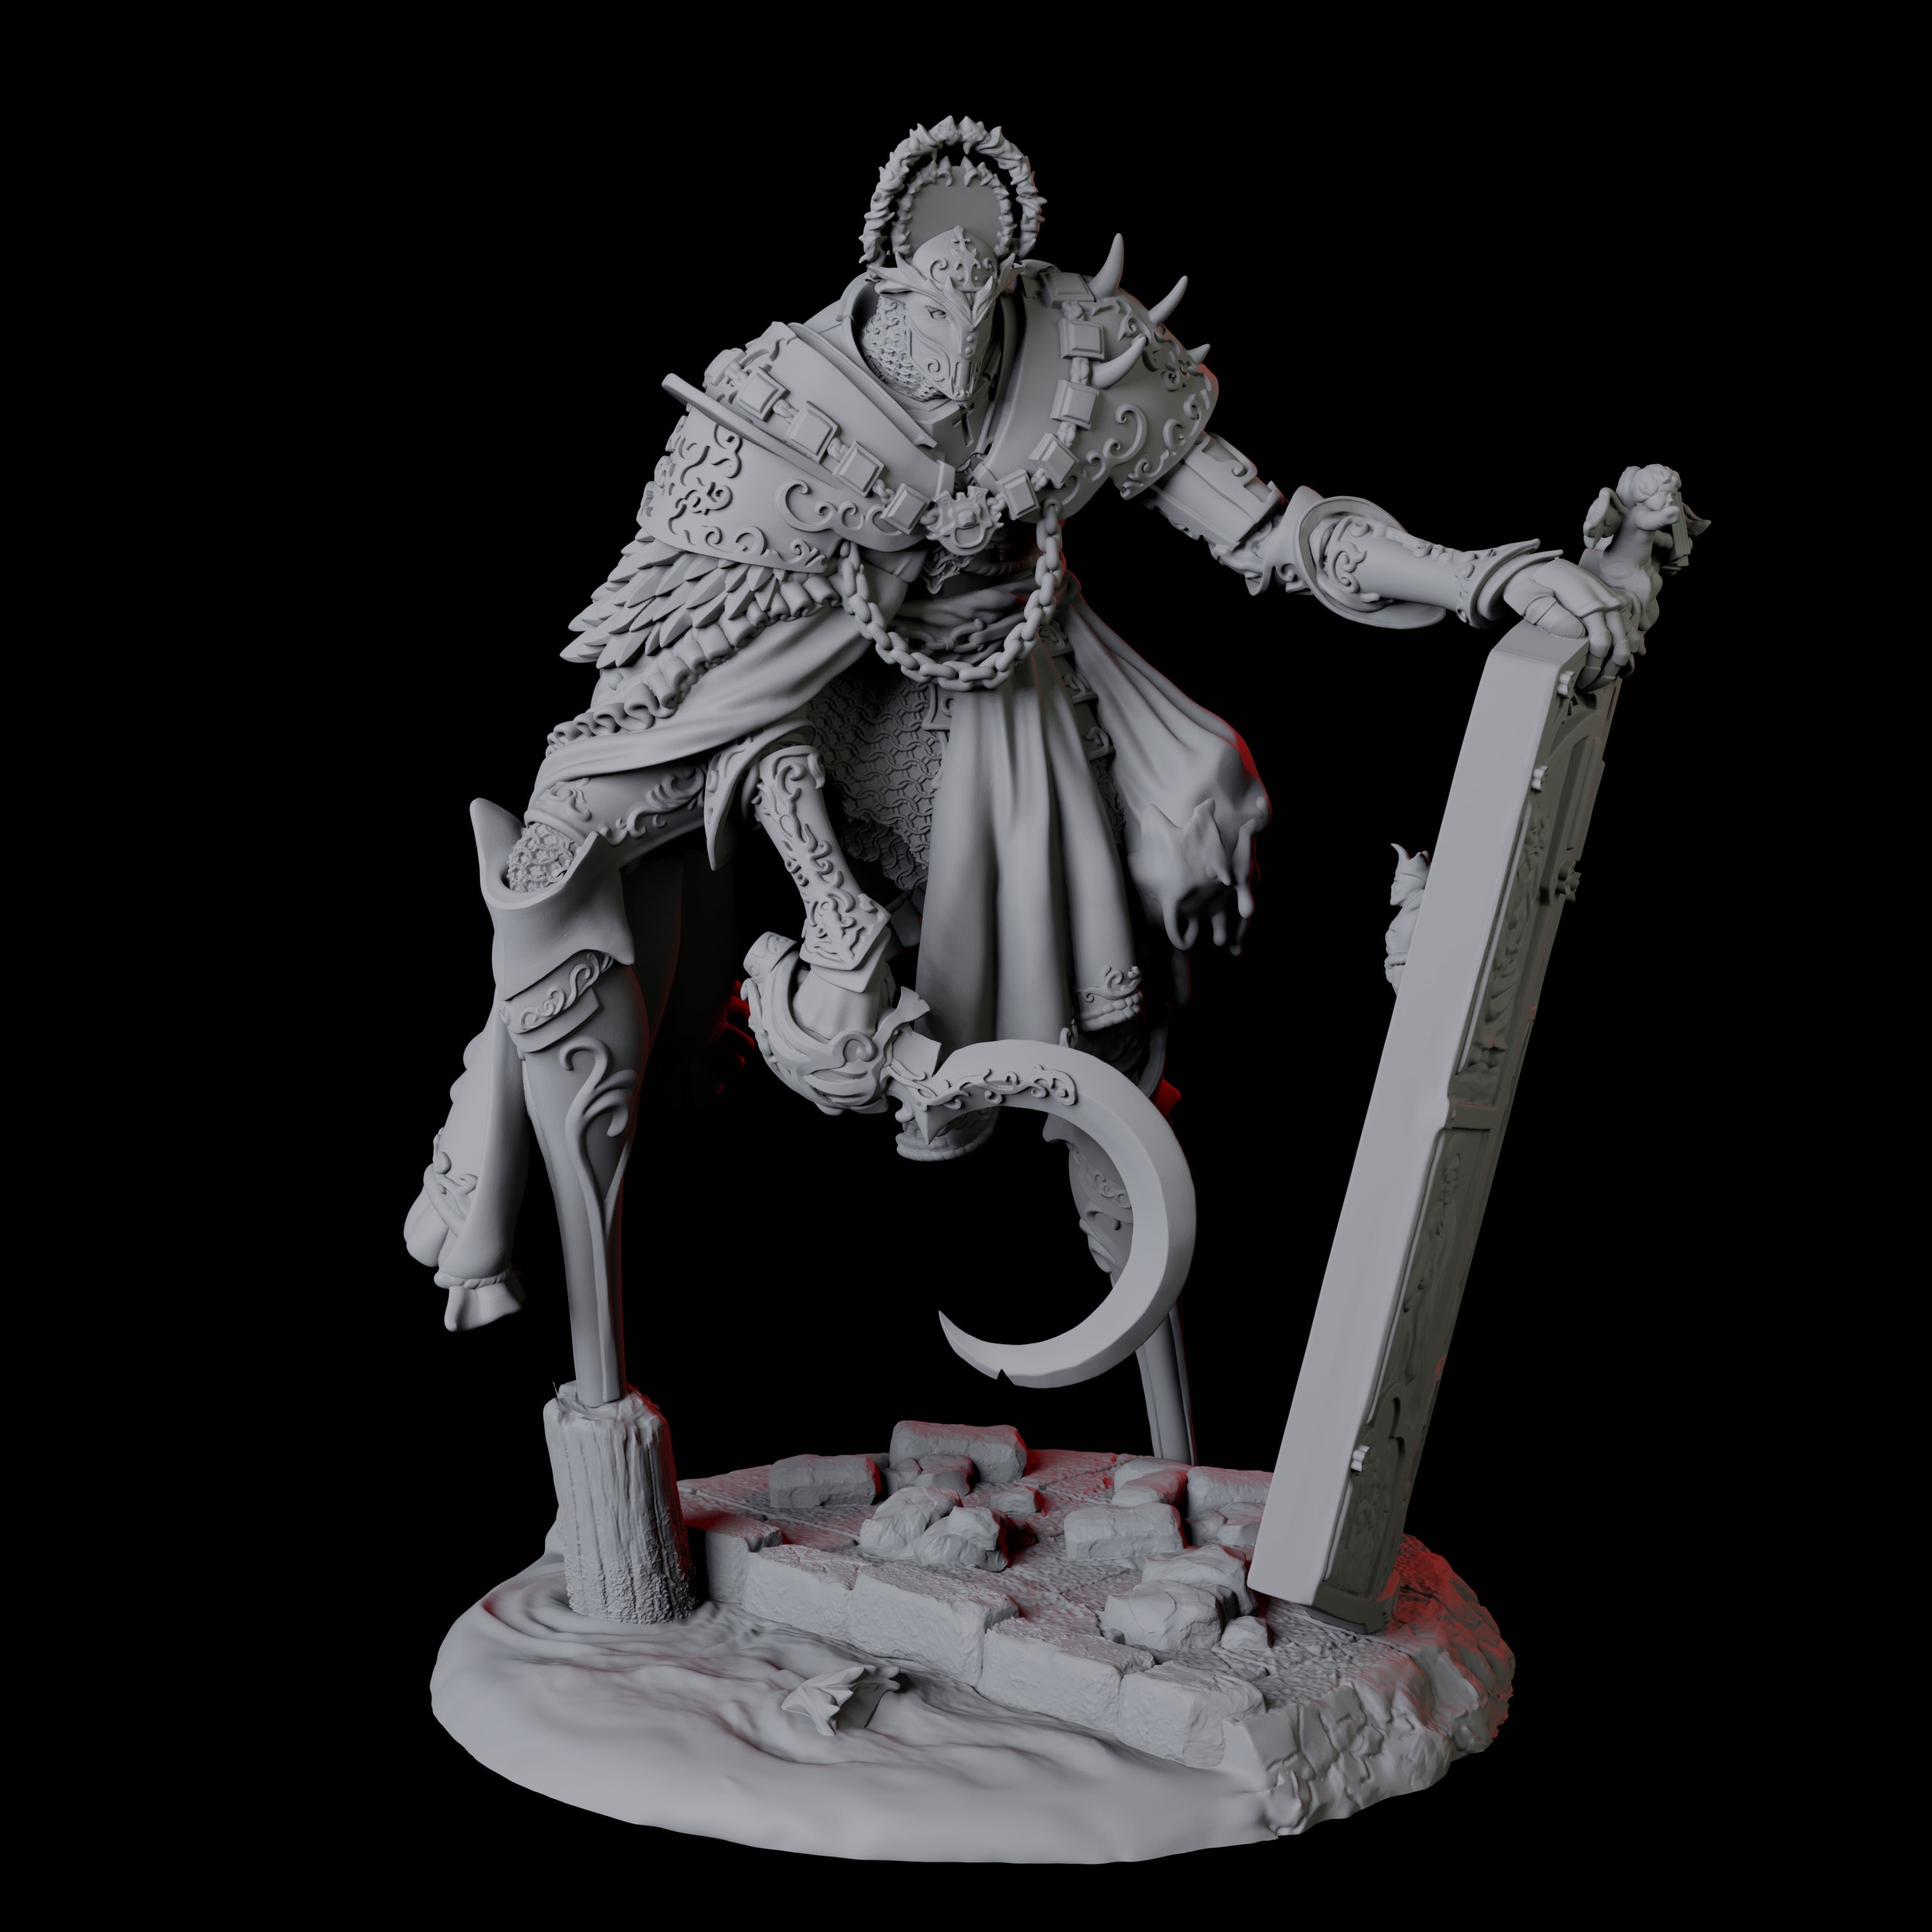 Guard Alchemical Golem C Miniature for Dungeons and Dragons, Pathfinder or other TTRPGs